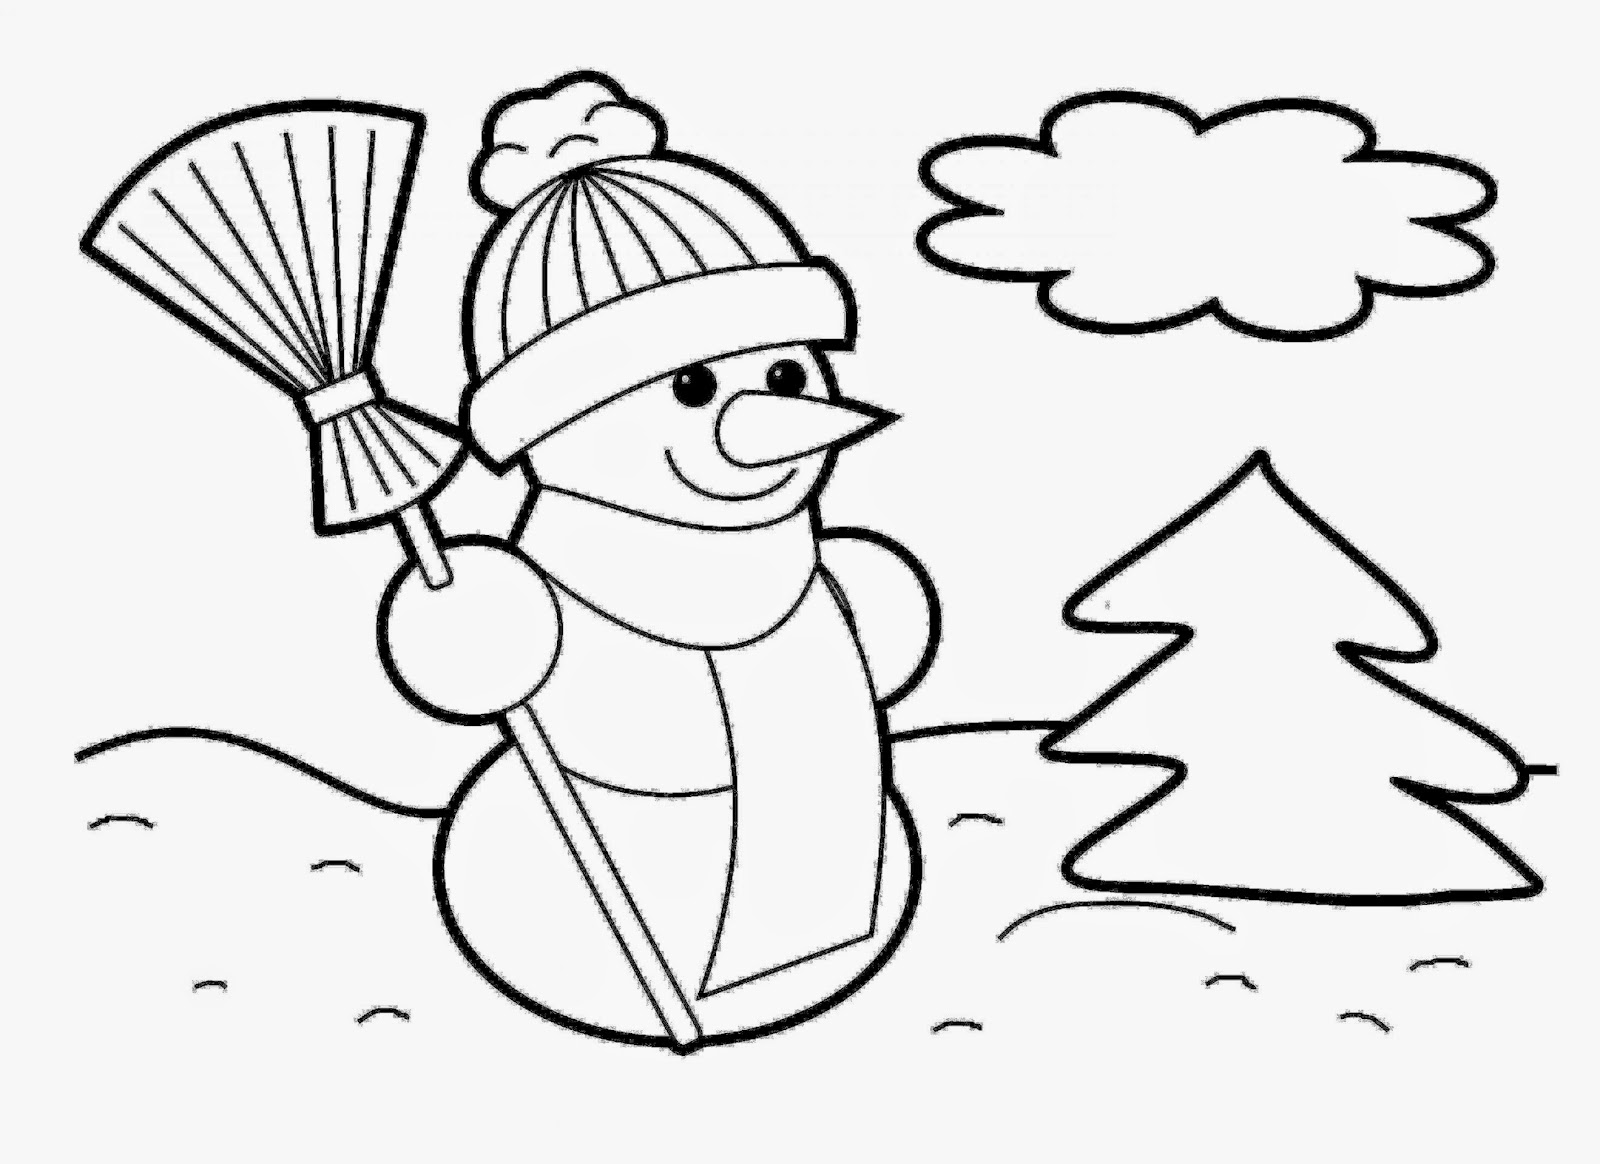 free-coloring-sheets-for-christmas-free-coloring-sheet